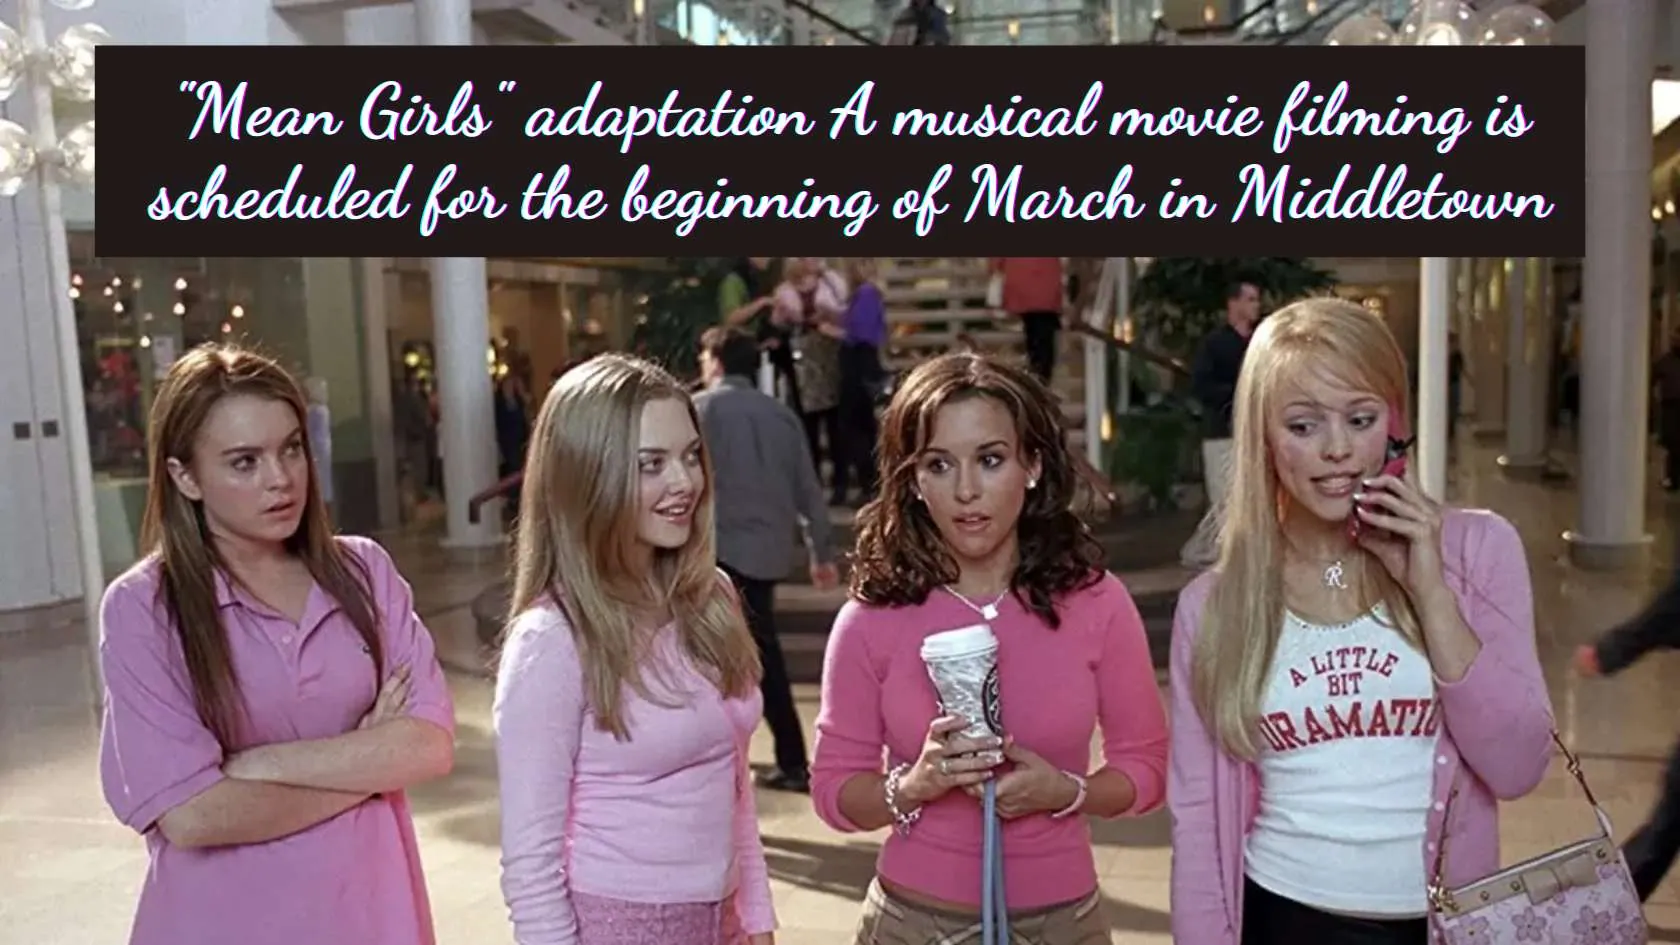 "Mean Girls" adaptation A musical movie filming is scheduled for March in Middletown